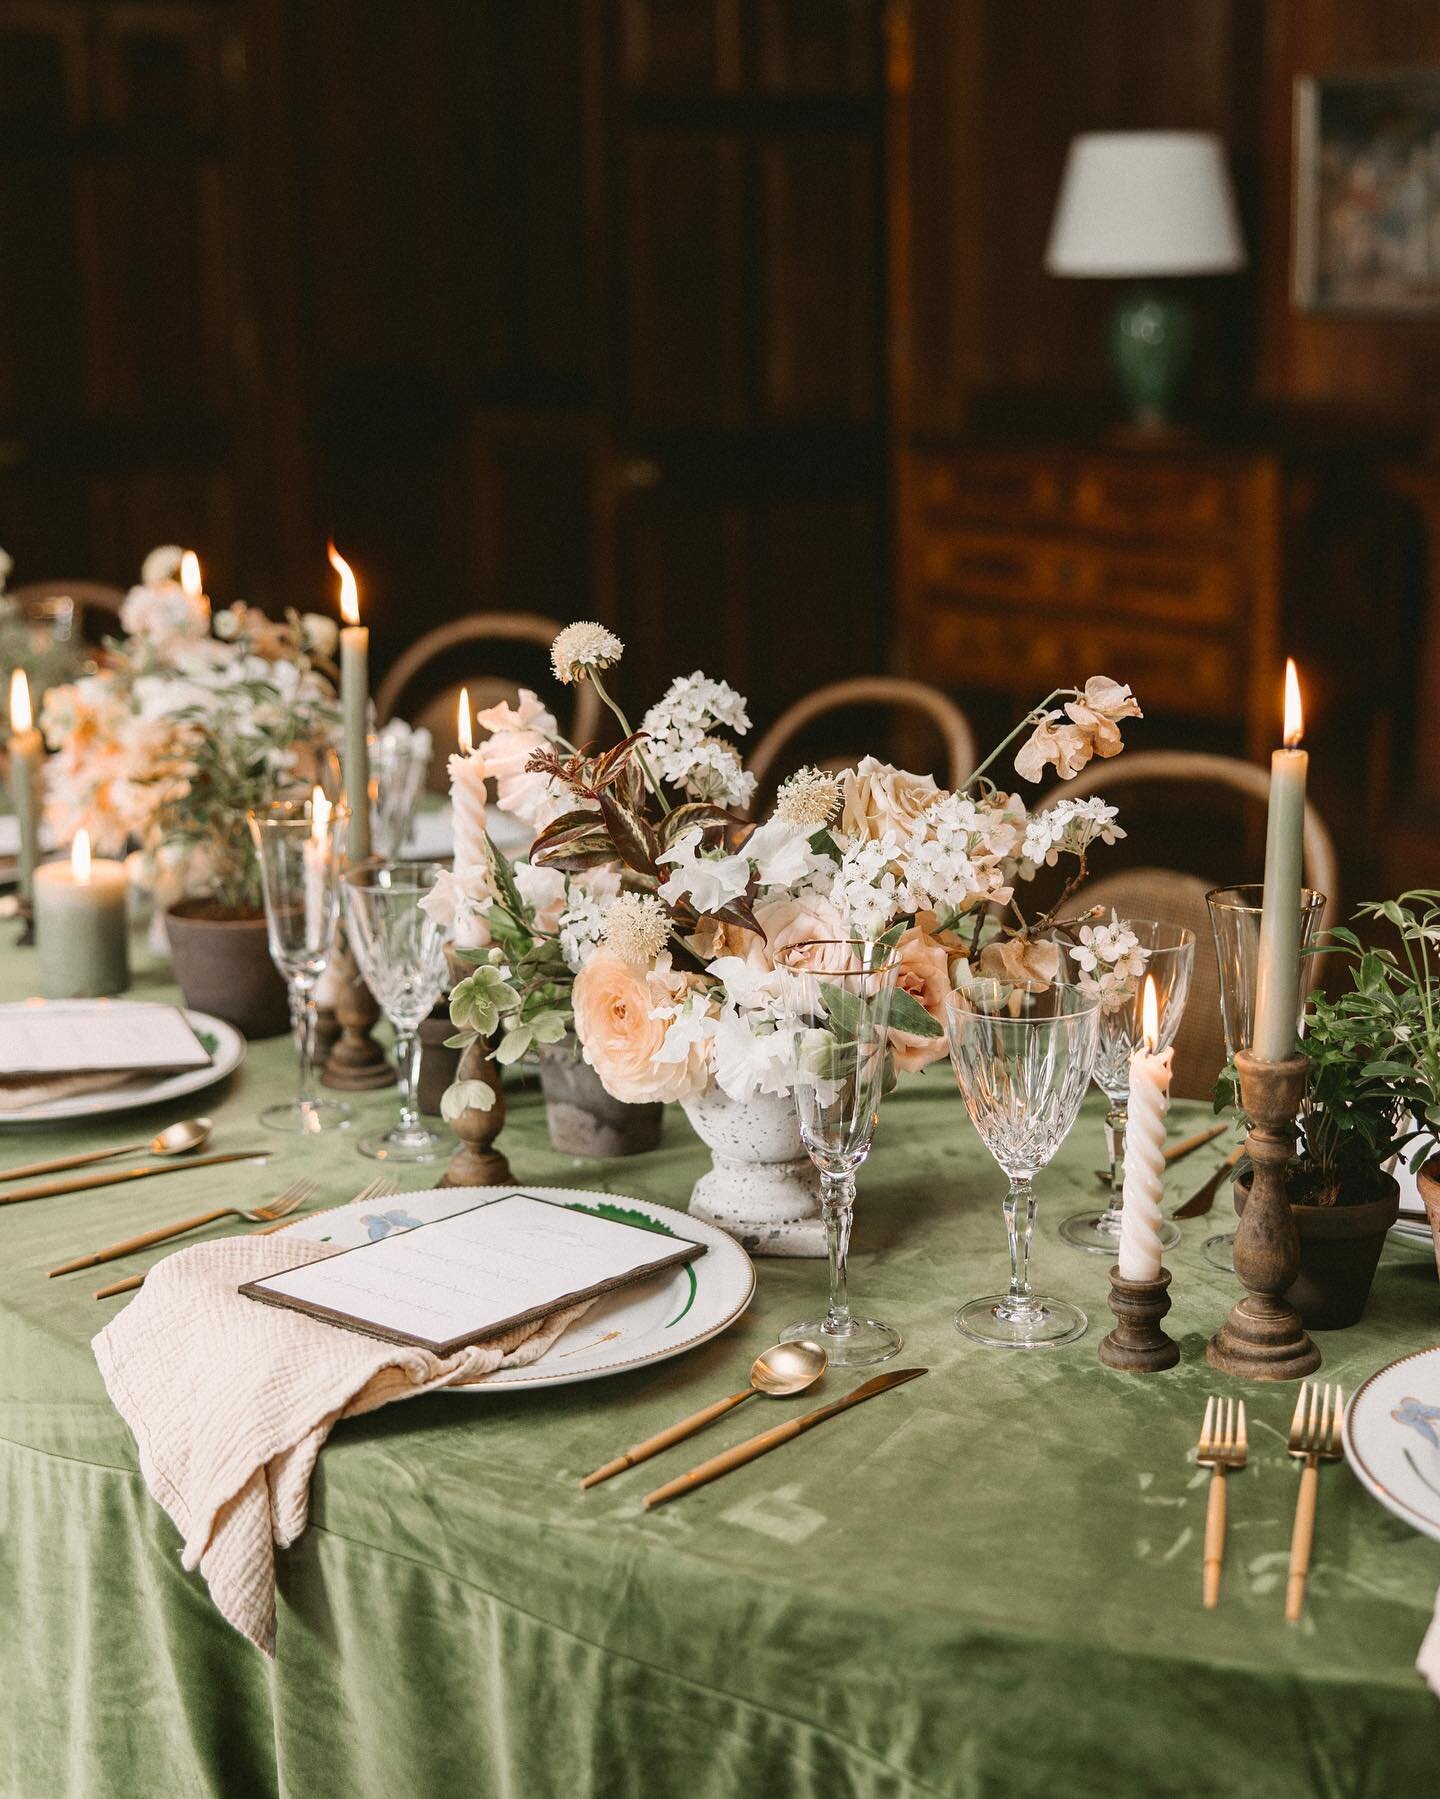 Back from my little social media break to share some drool worthy details from last week at Peterloon Estate. I&rsquo;m not sure I will ever be over this tablescape 🥵

design, planning, stationary &amp; signage - @heirloomdesignandcompany 
florals -